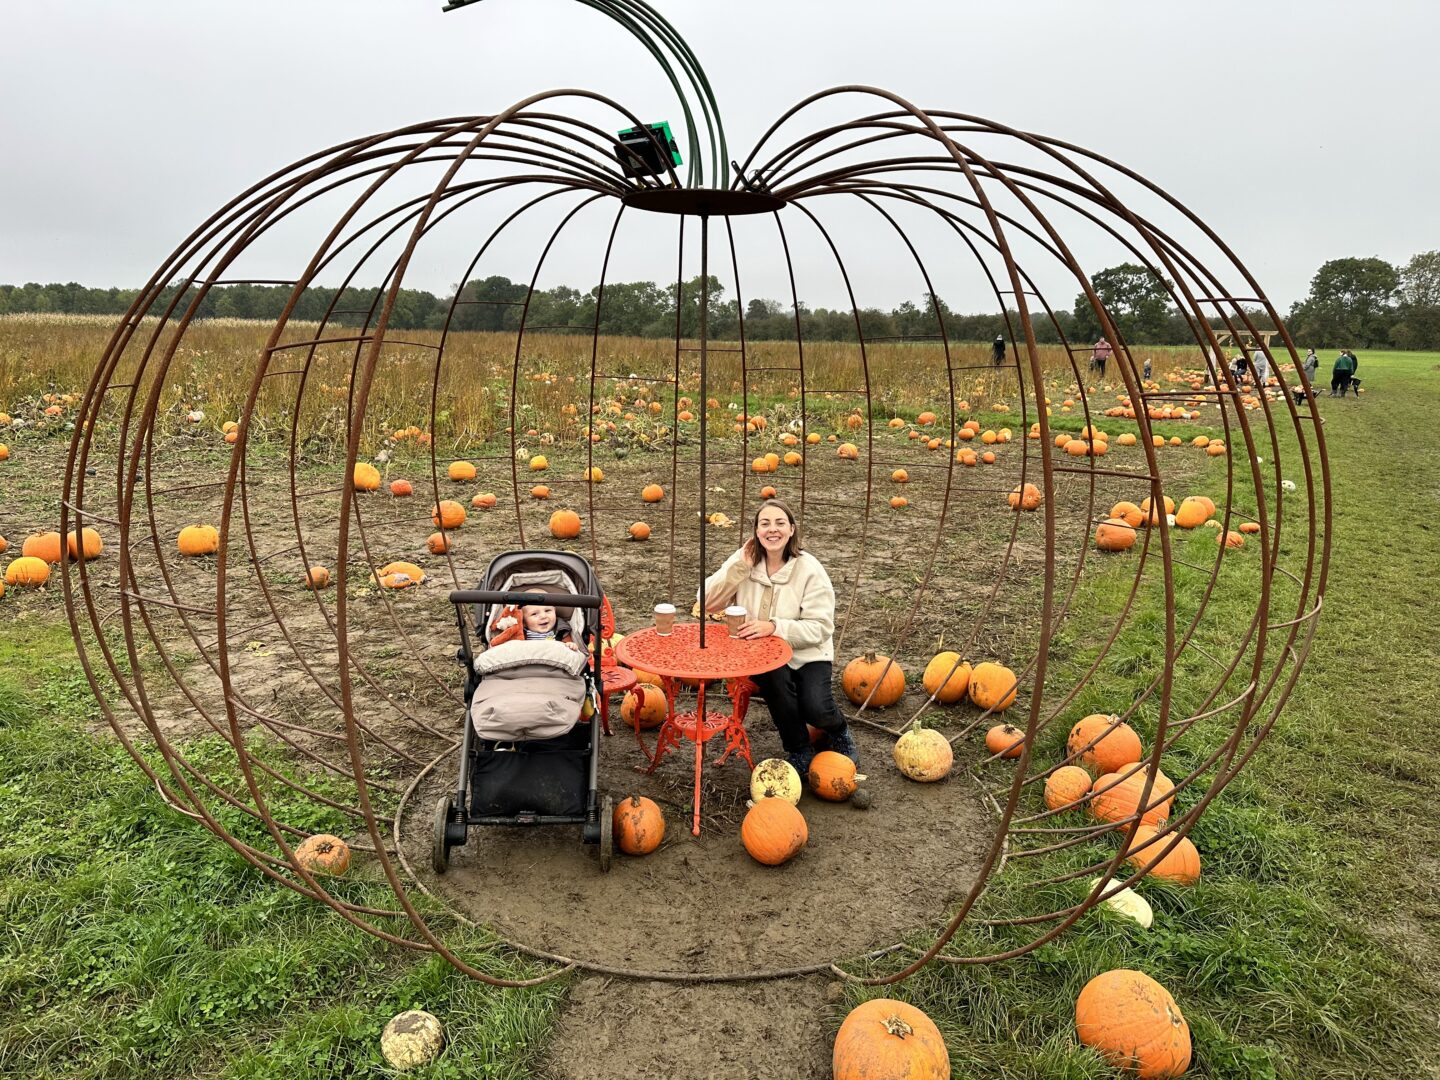 woman in a white fleece sits at an orange table in the middle of a field. A pushchair with a baby is parked next to her and a large wire sculpture of a pumpkin sits over them. 